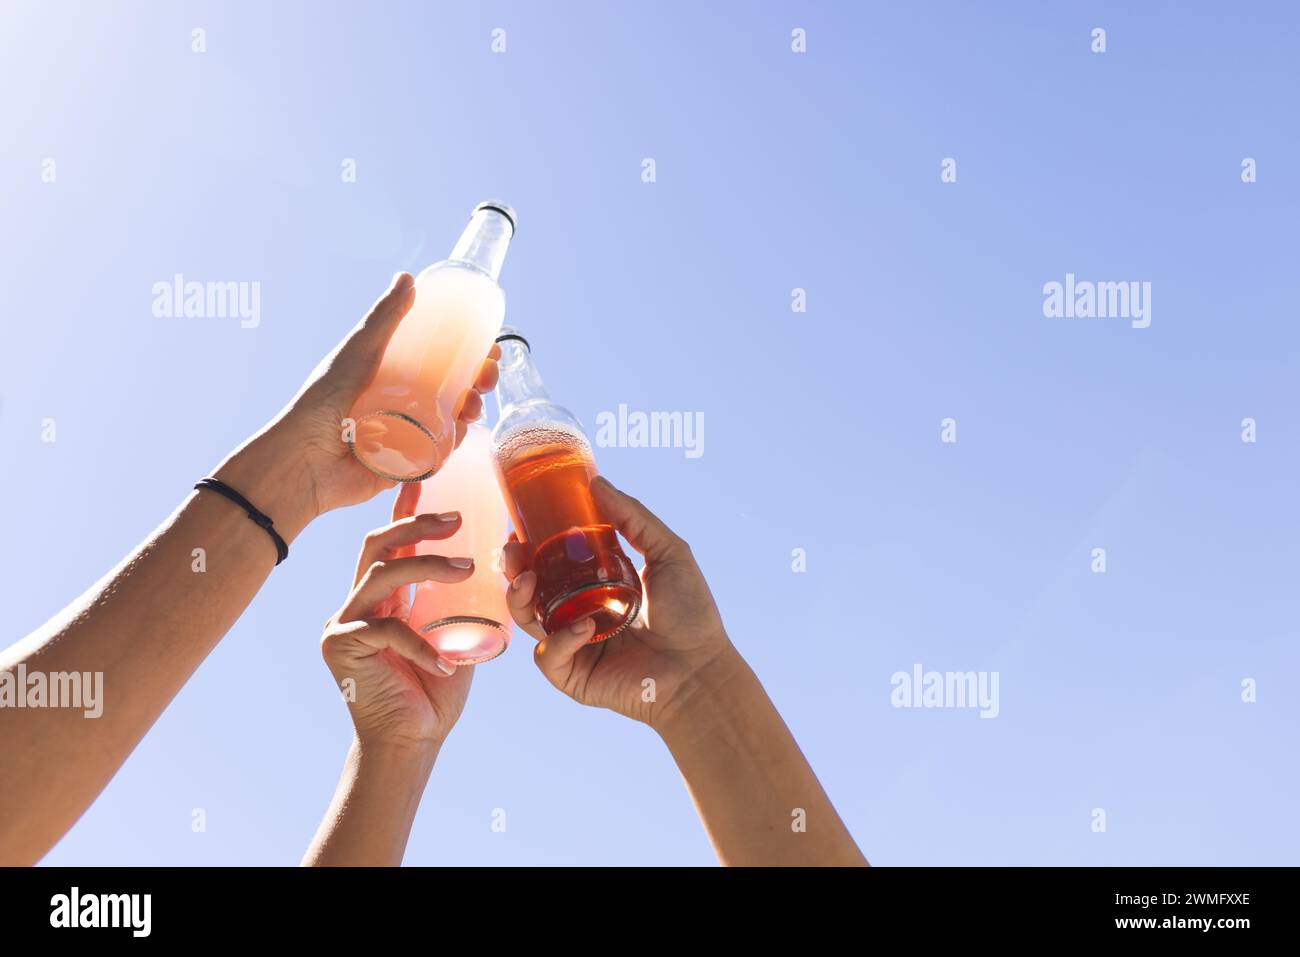 Hands clinking bottles against a clear blue sky Stock Photo